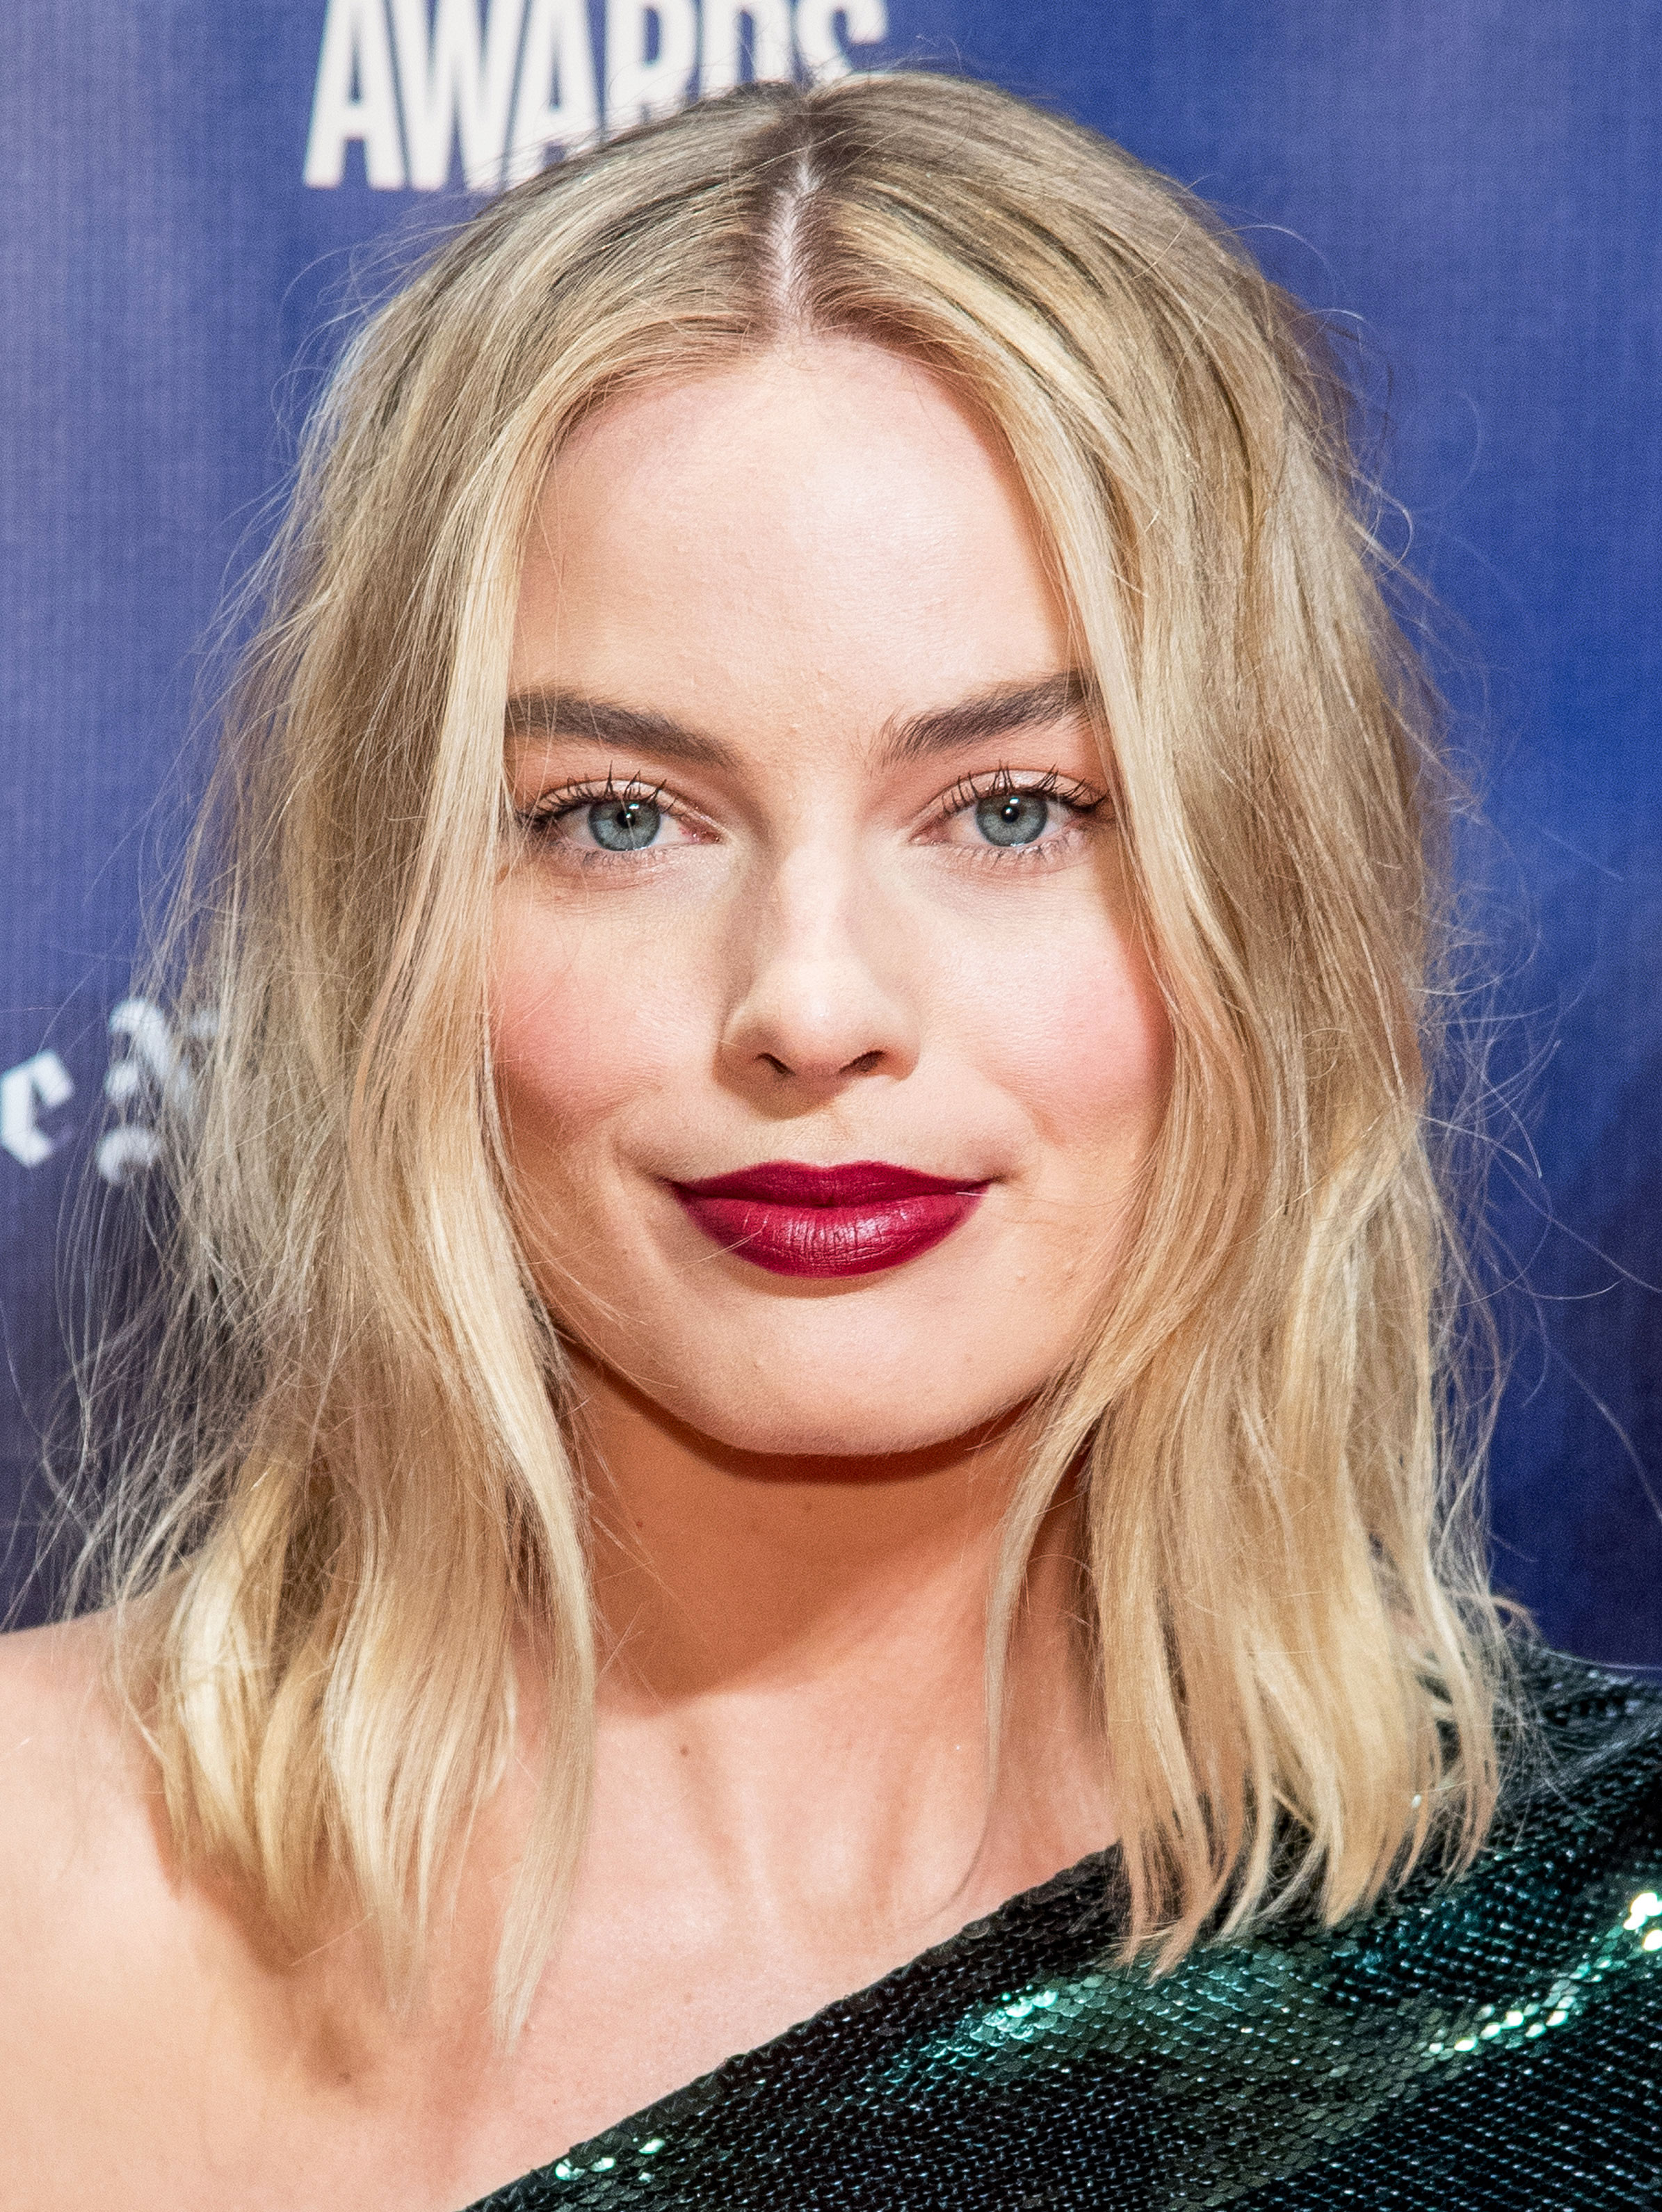 Margot Robbie’s I, Tonya Press Tour: Her Hair and Makeup Looks | Us Weekly